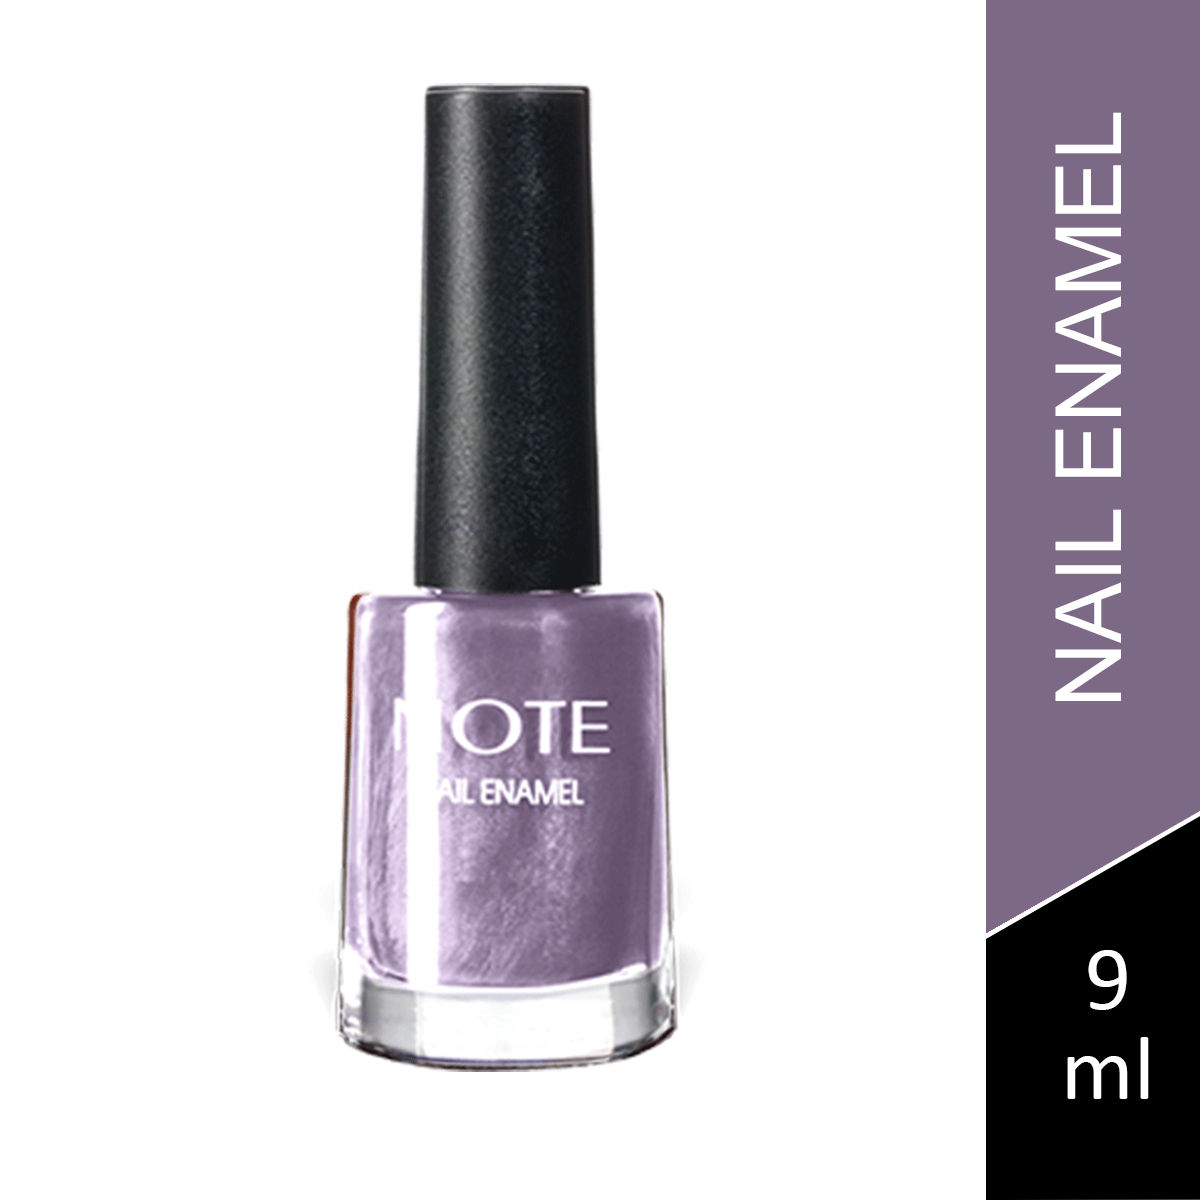 Note Nail Enamel Buy Note Nail Enamel Online At Best Price In India Nykaa